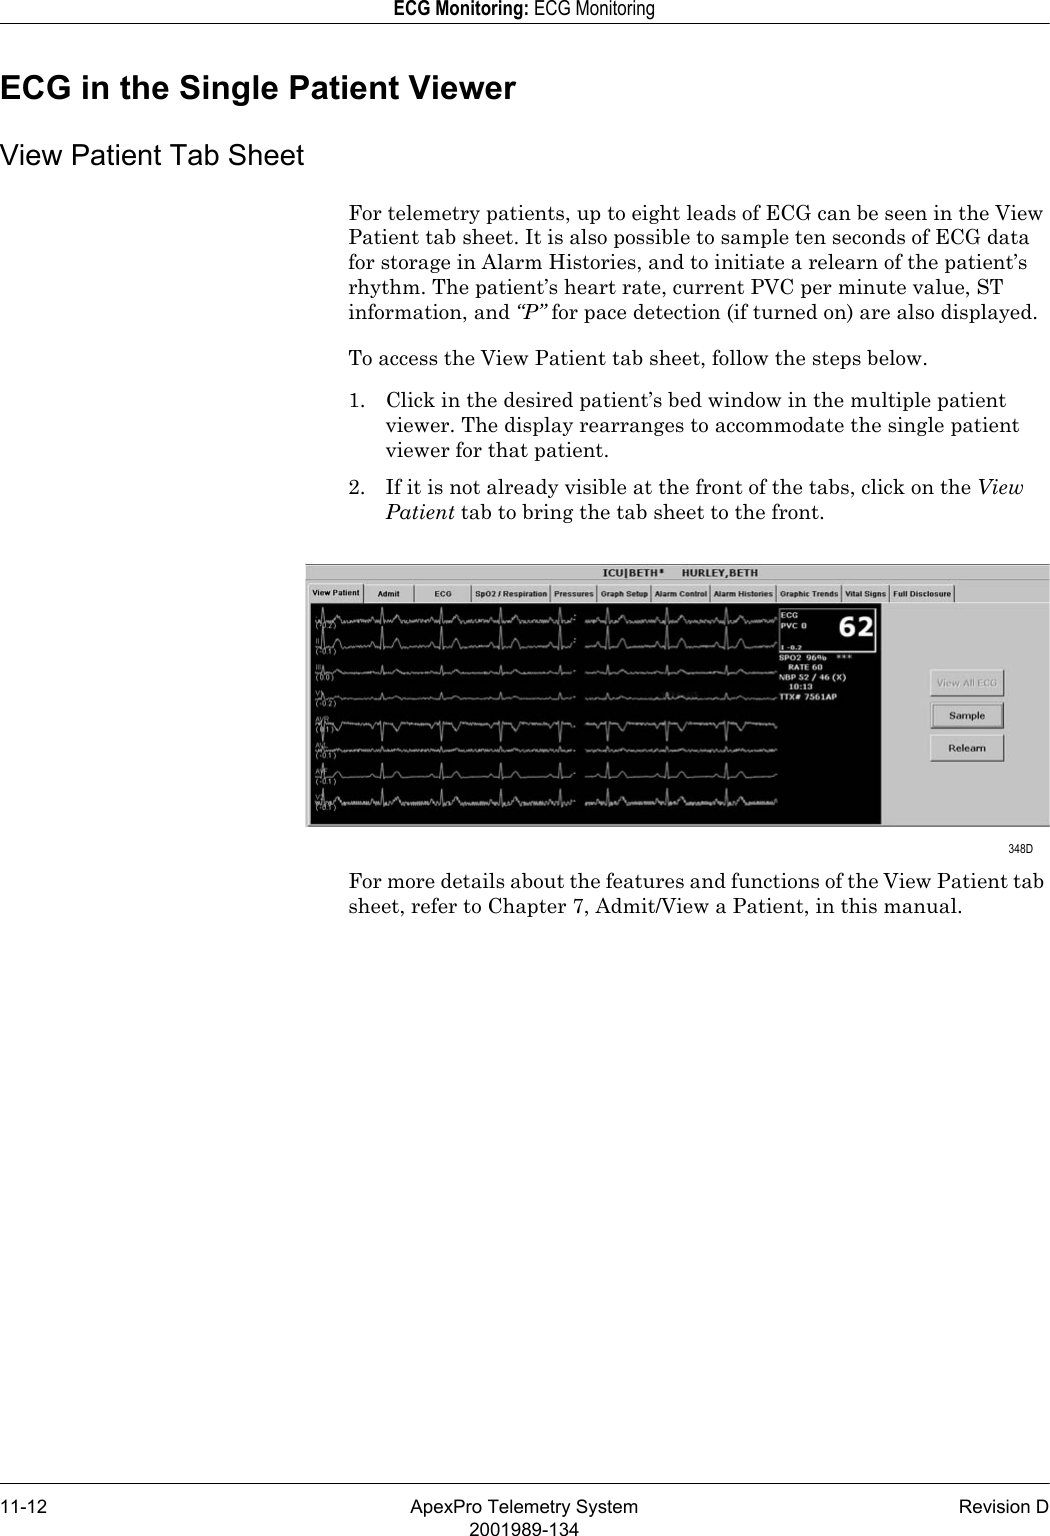 11-12 ApexPro Telemetry System Revision D2001989-134ECG Monitoring: ECG MonitoringECG in the Single Patient ViewerView Patient Tab SheetFor telemetry patients, up to eight leads of ECG can be seen in the View Patient tab sheet. It is also possible to sample ten seconds of ECG data for storage in Alarm Histories, and to initiate a relearn of the patient’s rhythm. The patient’s heart rate, current PVC per minute value, ST information, and “P” for pace detection (if turned on) are also displayed.To access the View Patient tab sheet, follow the steps below.1. Click in the desired patient’s bed window in the multiple patient viewer. The display rearranges to accommodate the single patient viewer for that patient.2. If it is not already visible at the front of the tabs, click on the View Patient tab to bring the tab sheet to the front.For more details about the features and functions of the View Patient tab sheet, refer to Chapter 7, Admit/View a Patient, in this manual. 348D